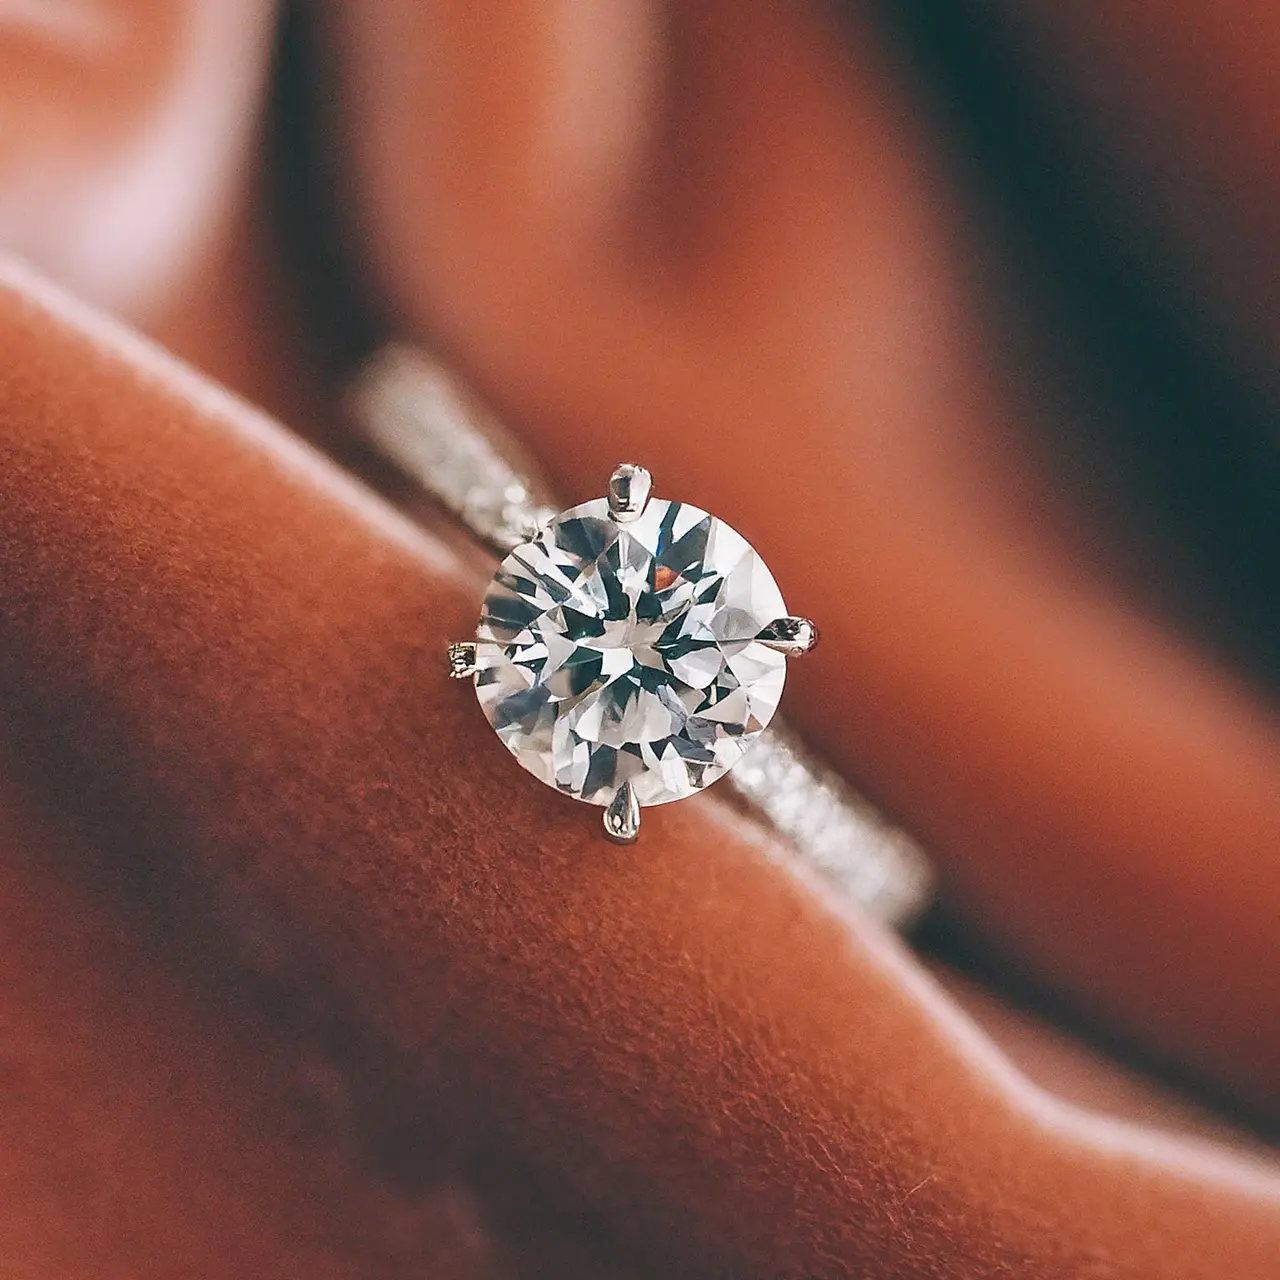 A sparkling lab-grown diamond ring against a soft, velvet background. 35mm stock photo